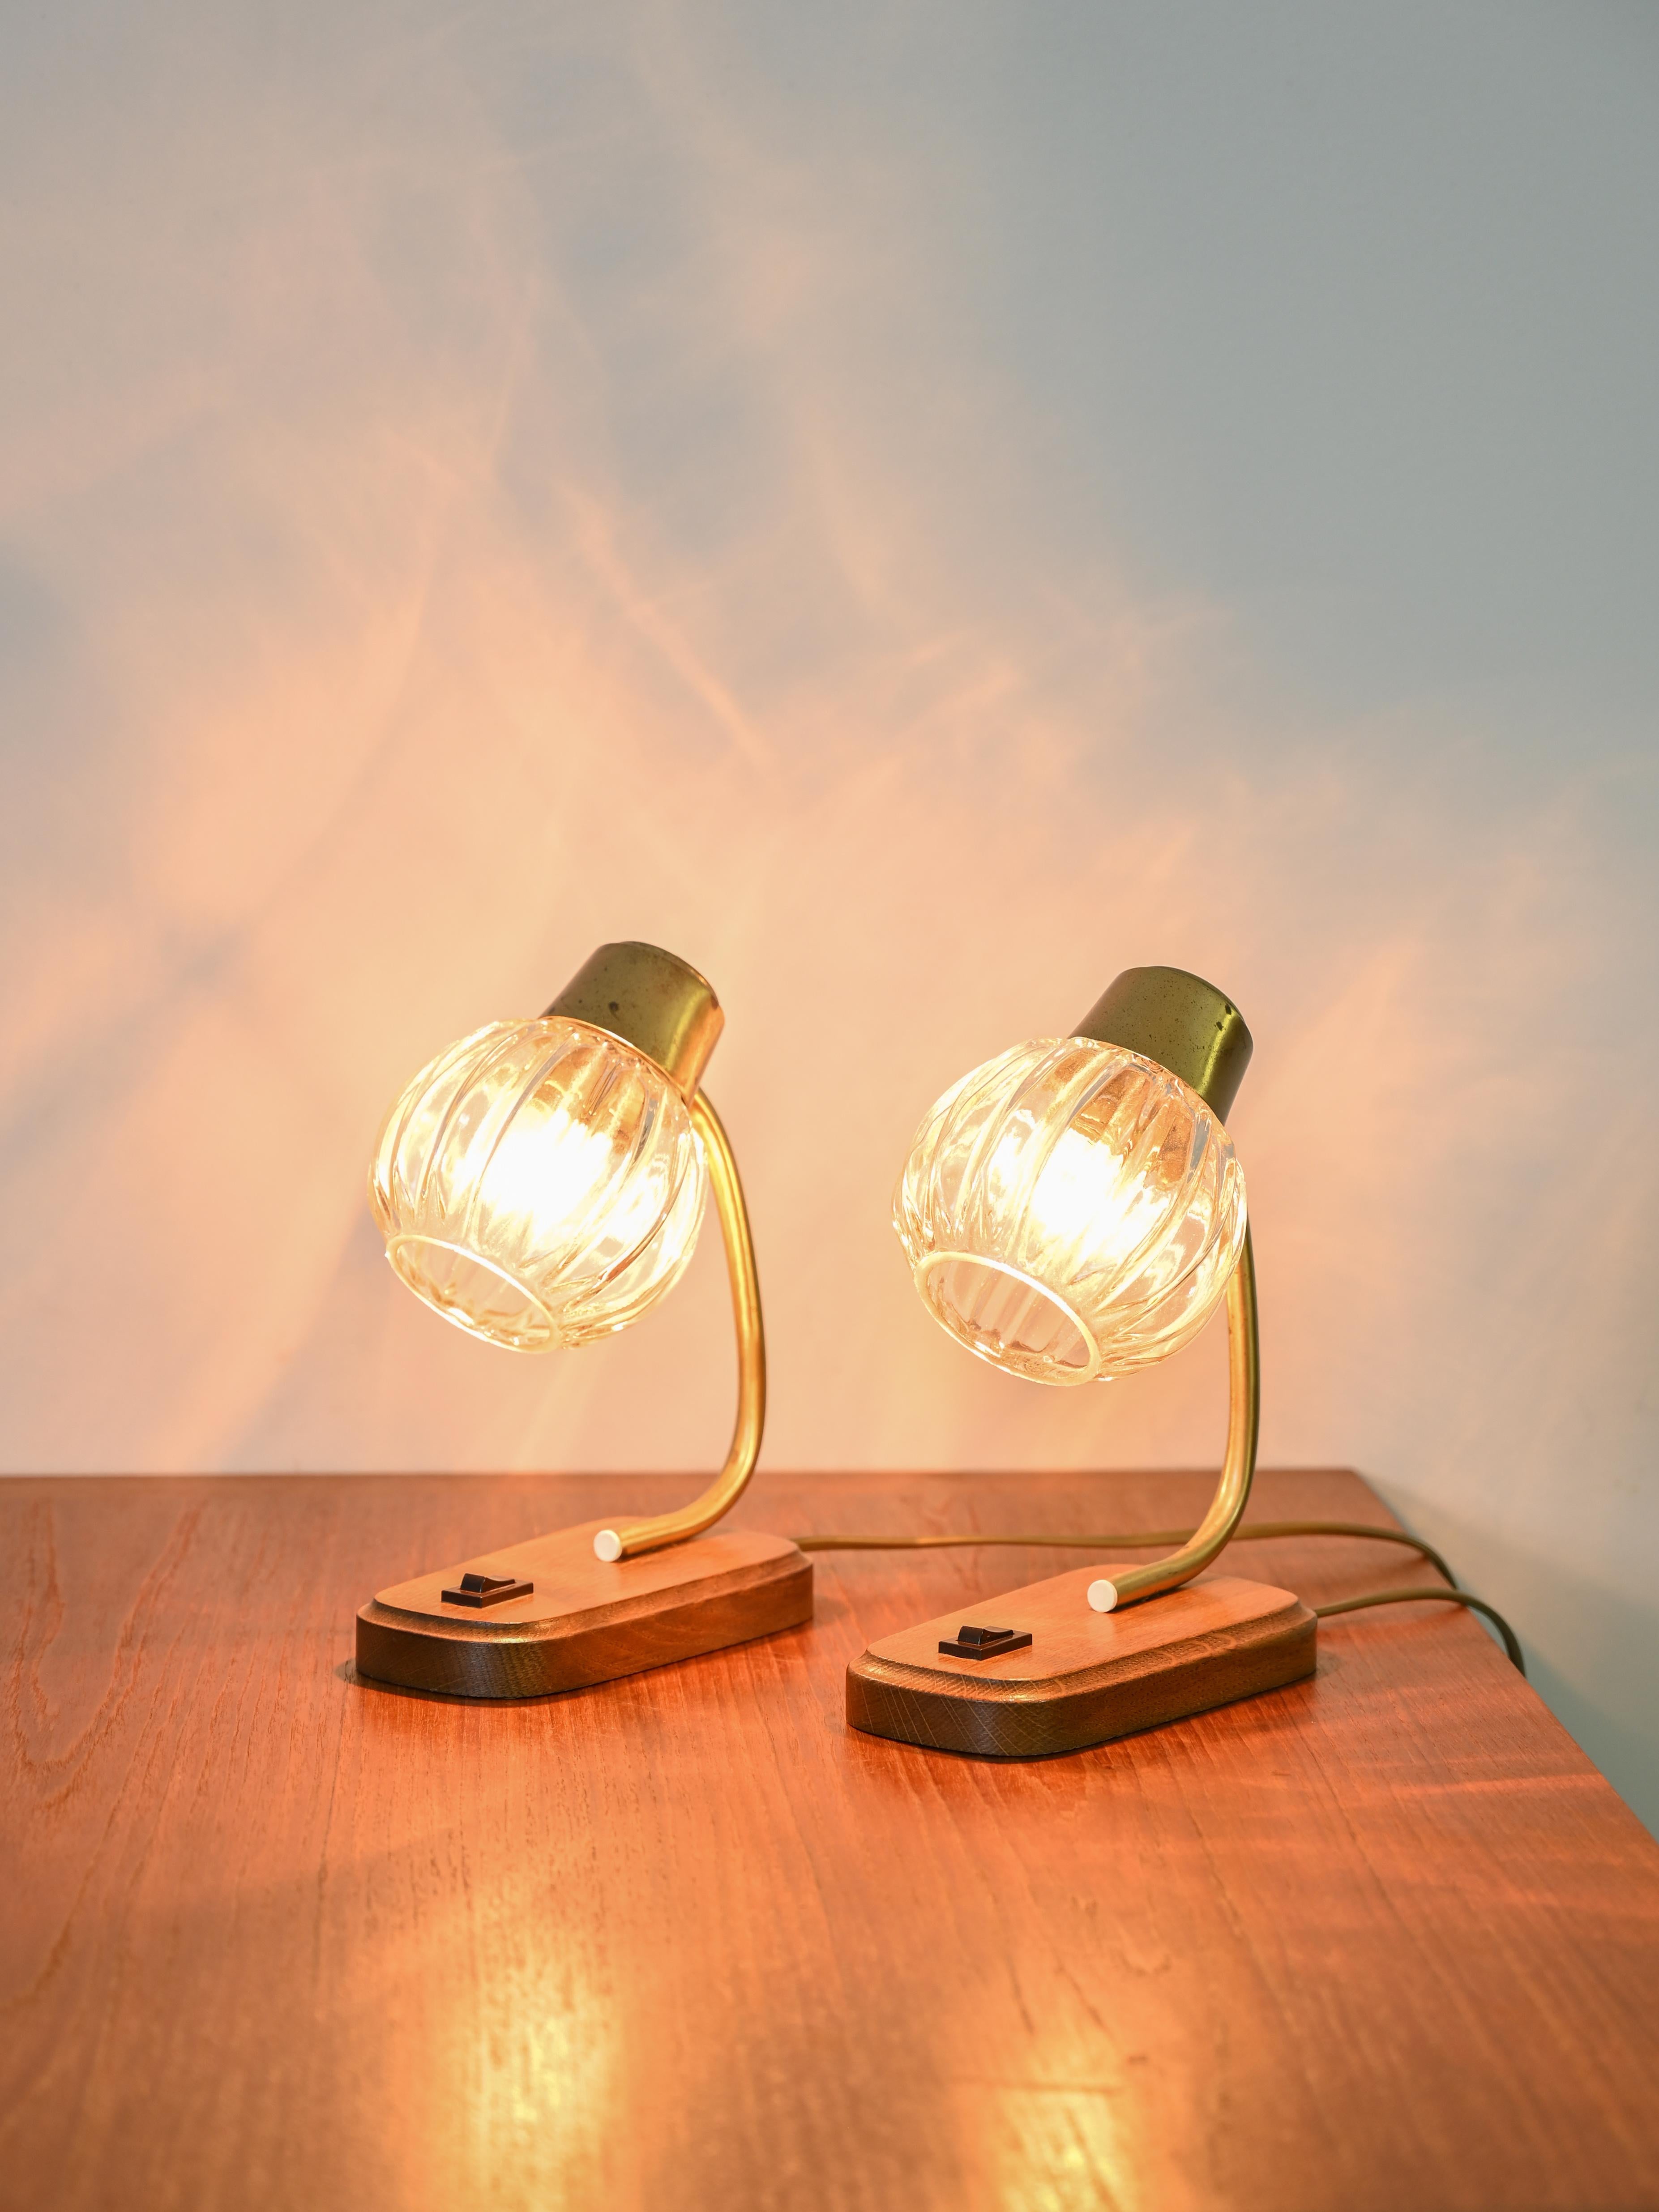 Original vintage teak and glass bedside lamps.
Consisting of a teak wood base, a gold-plated metal arm and glass shade.
The typical 1960s style makes them perfect for giving a retro touch to the bedroom.


BC045.